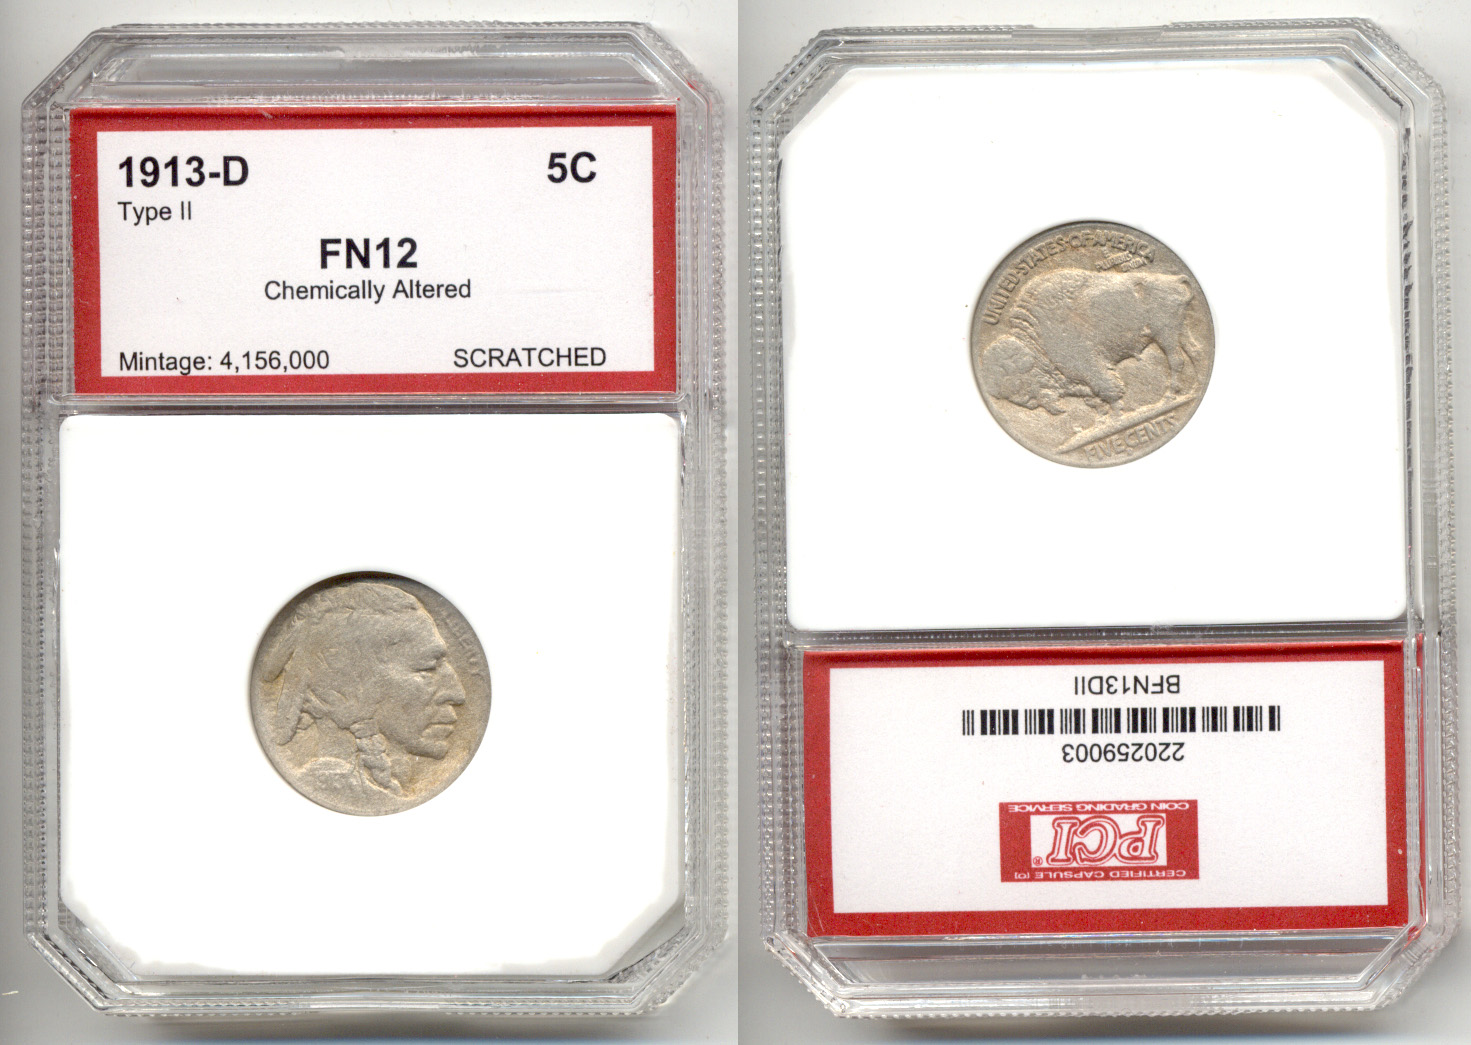 1913-D Type 2 Buffalo Nickel PCI F-12 Chemically Altered